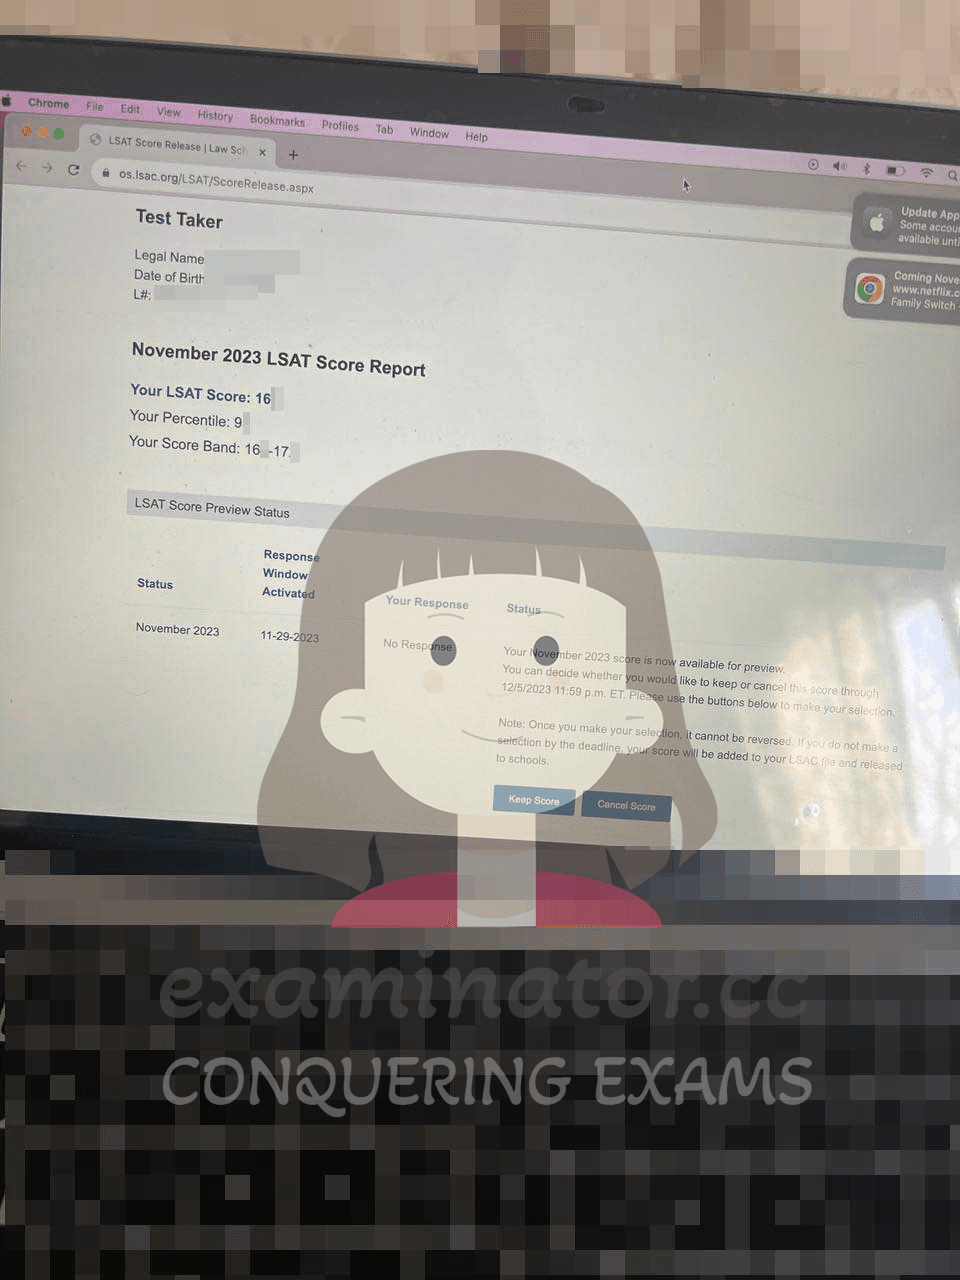 🇺🇸 November LSAT Score Update 🔥 From Stress to Success: US Client's LSAT Journey with Daisy's Expert Test-Taking Help 💪